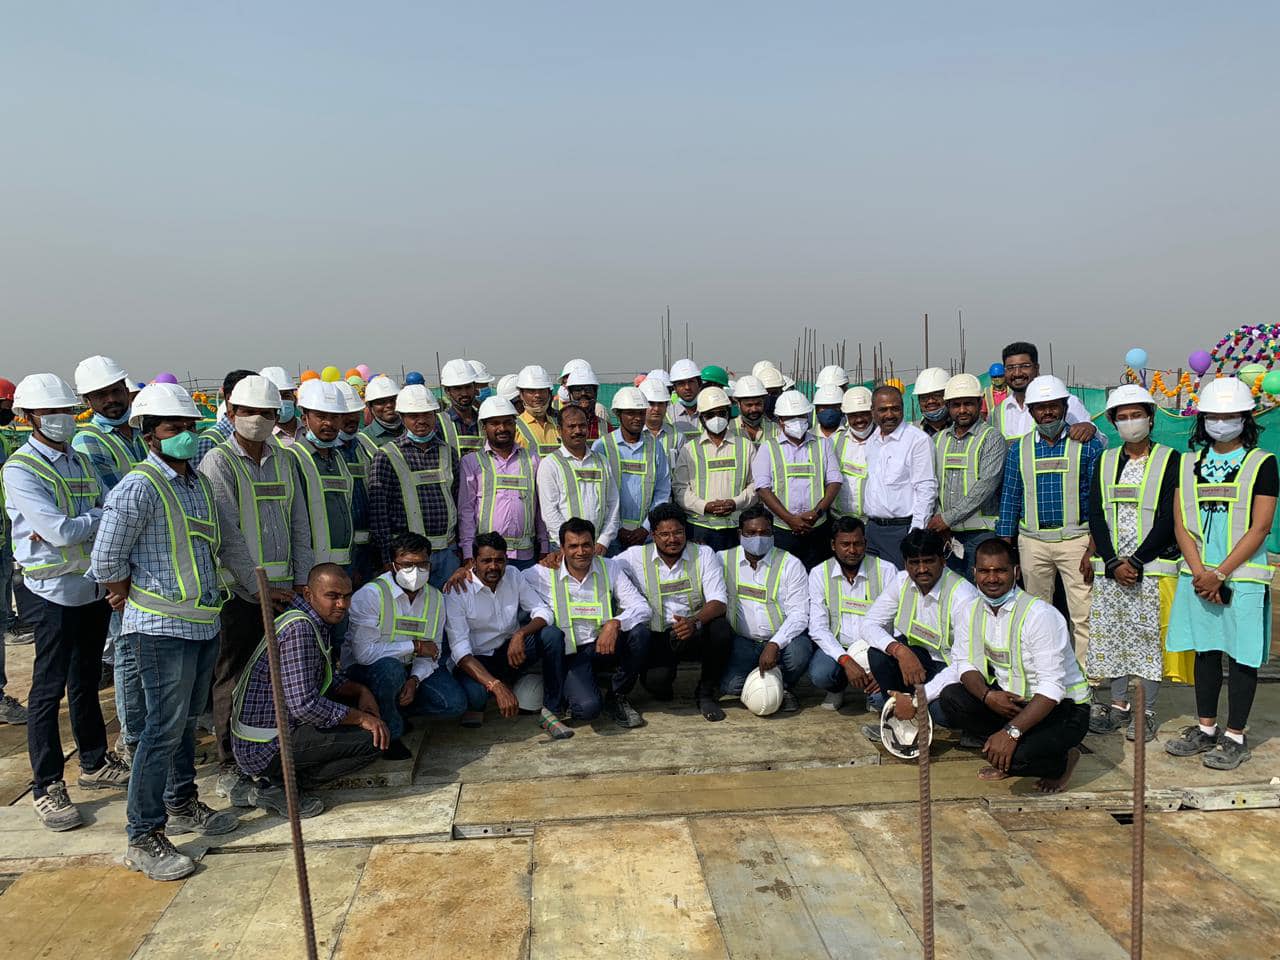 Regal Tower Topping Out Celebration